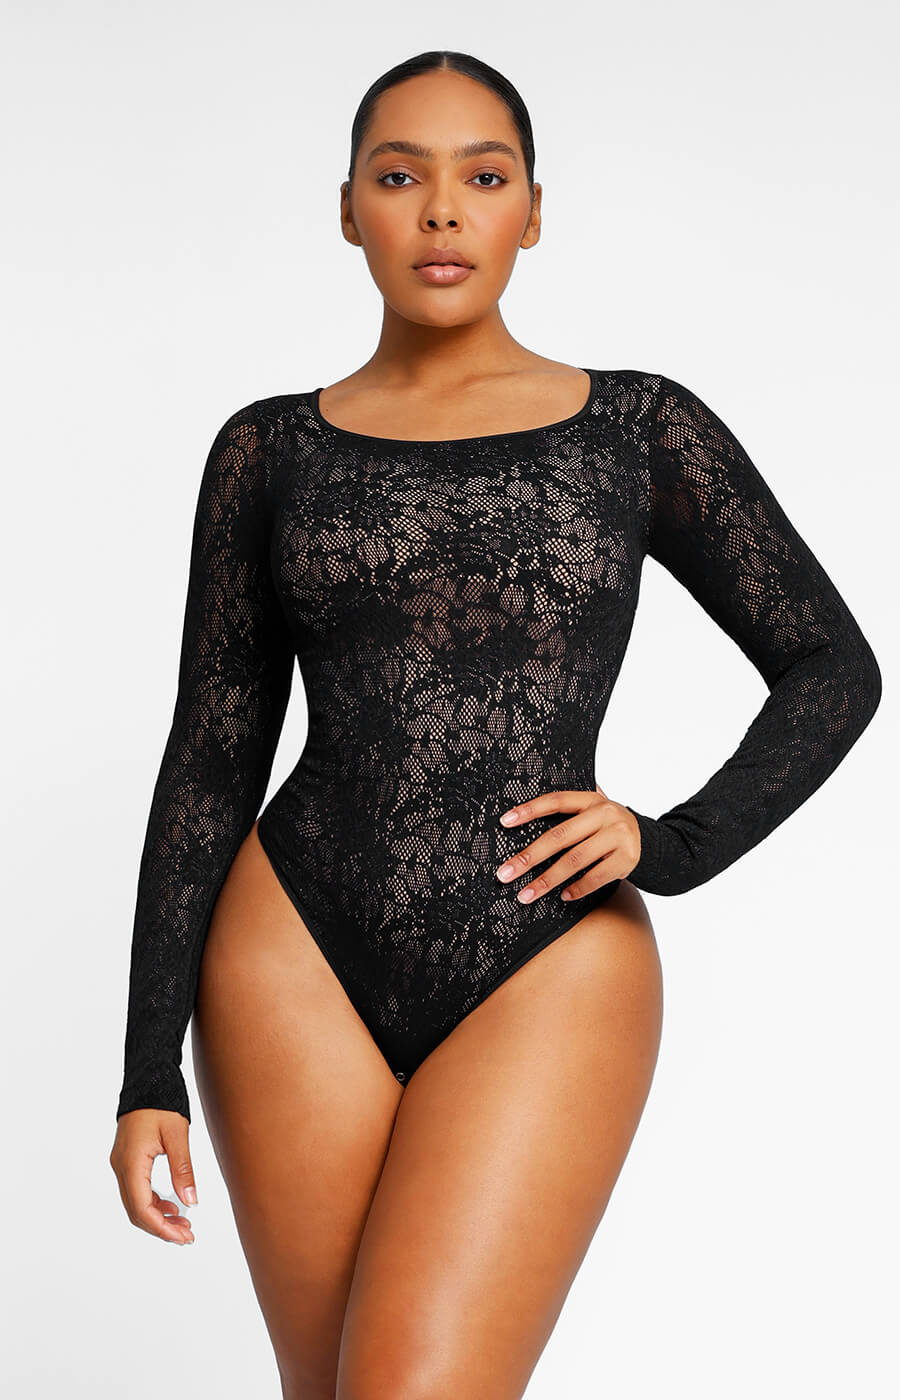 Lace Glamour Stretchy Floral Shaping Bodysuit